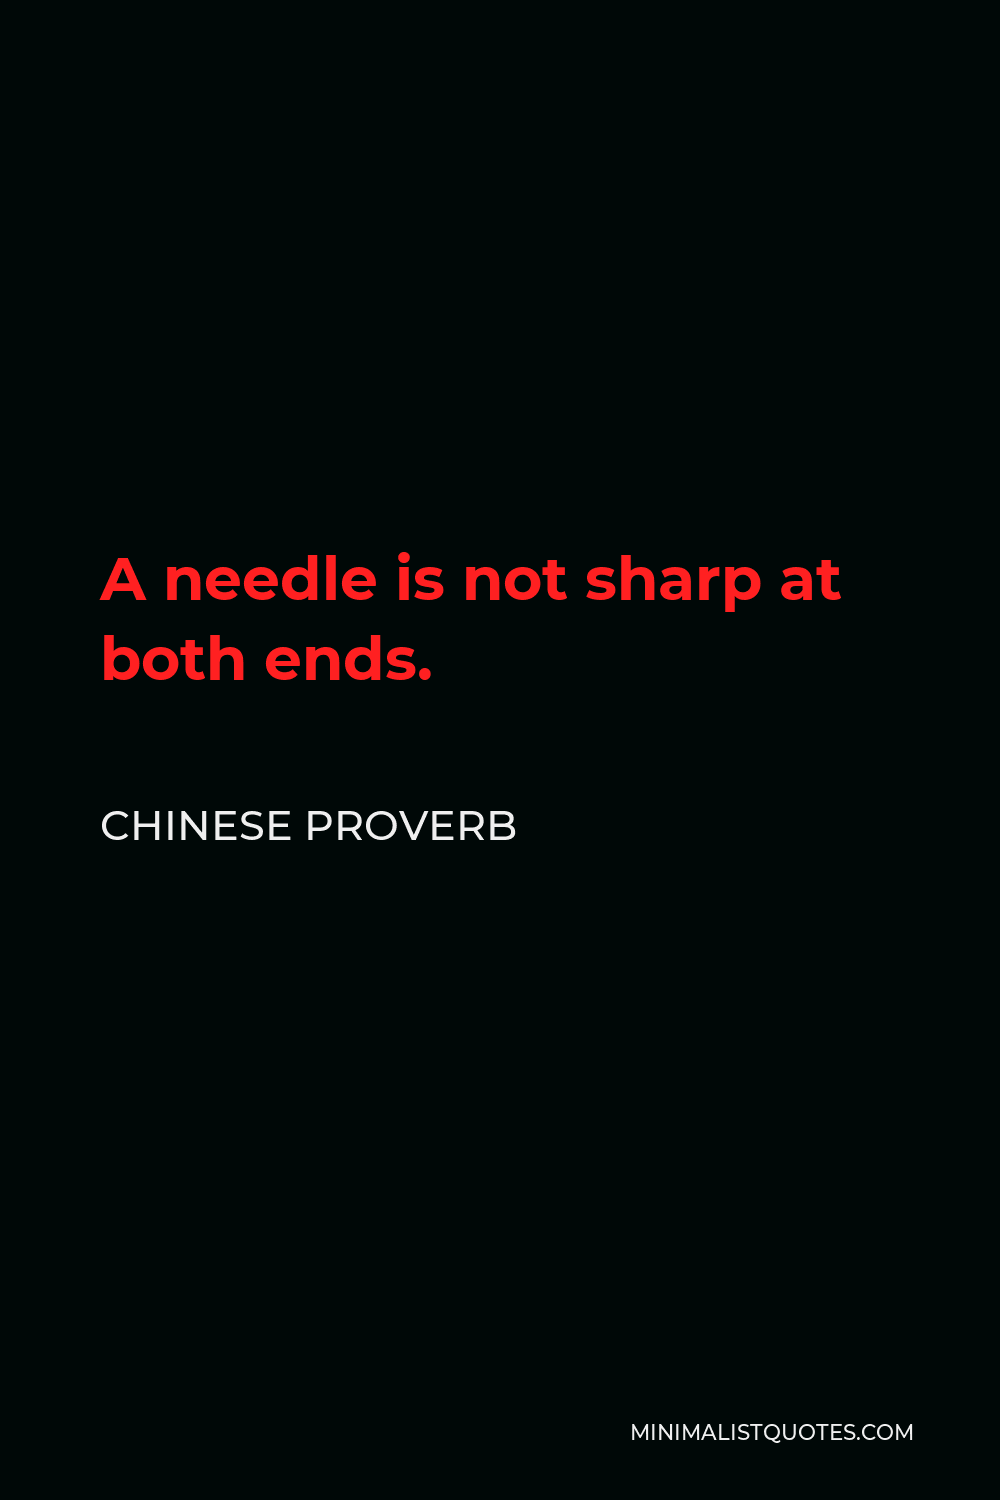 Chinese Proverb Quote - A needle is not sharp at both ends.